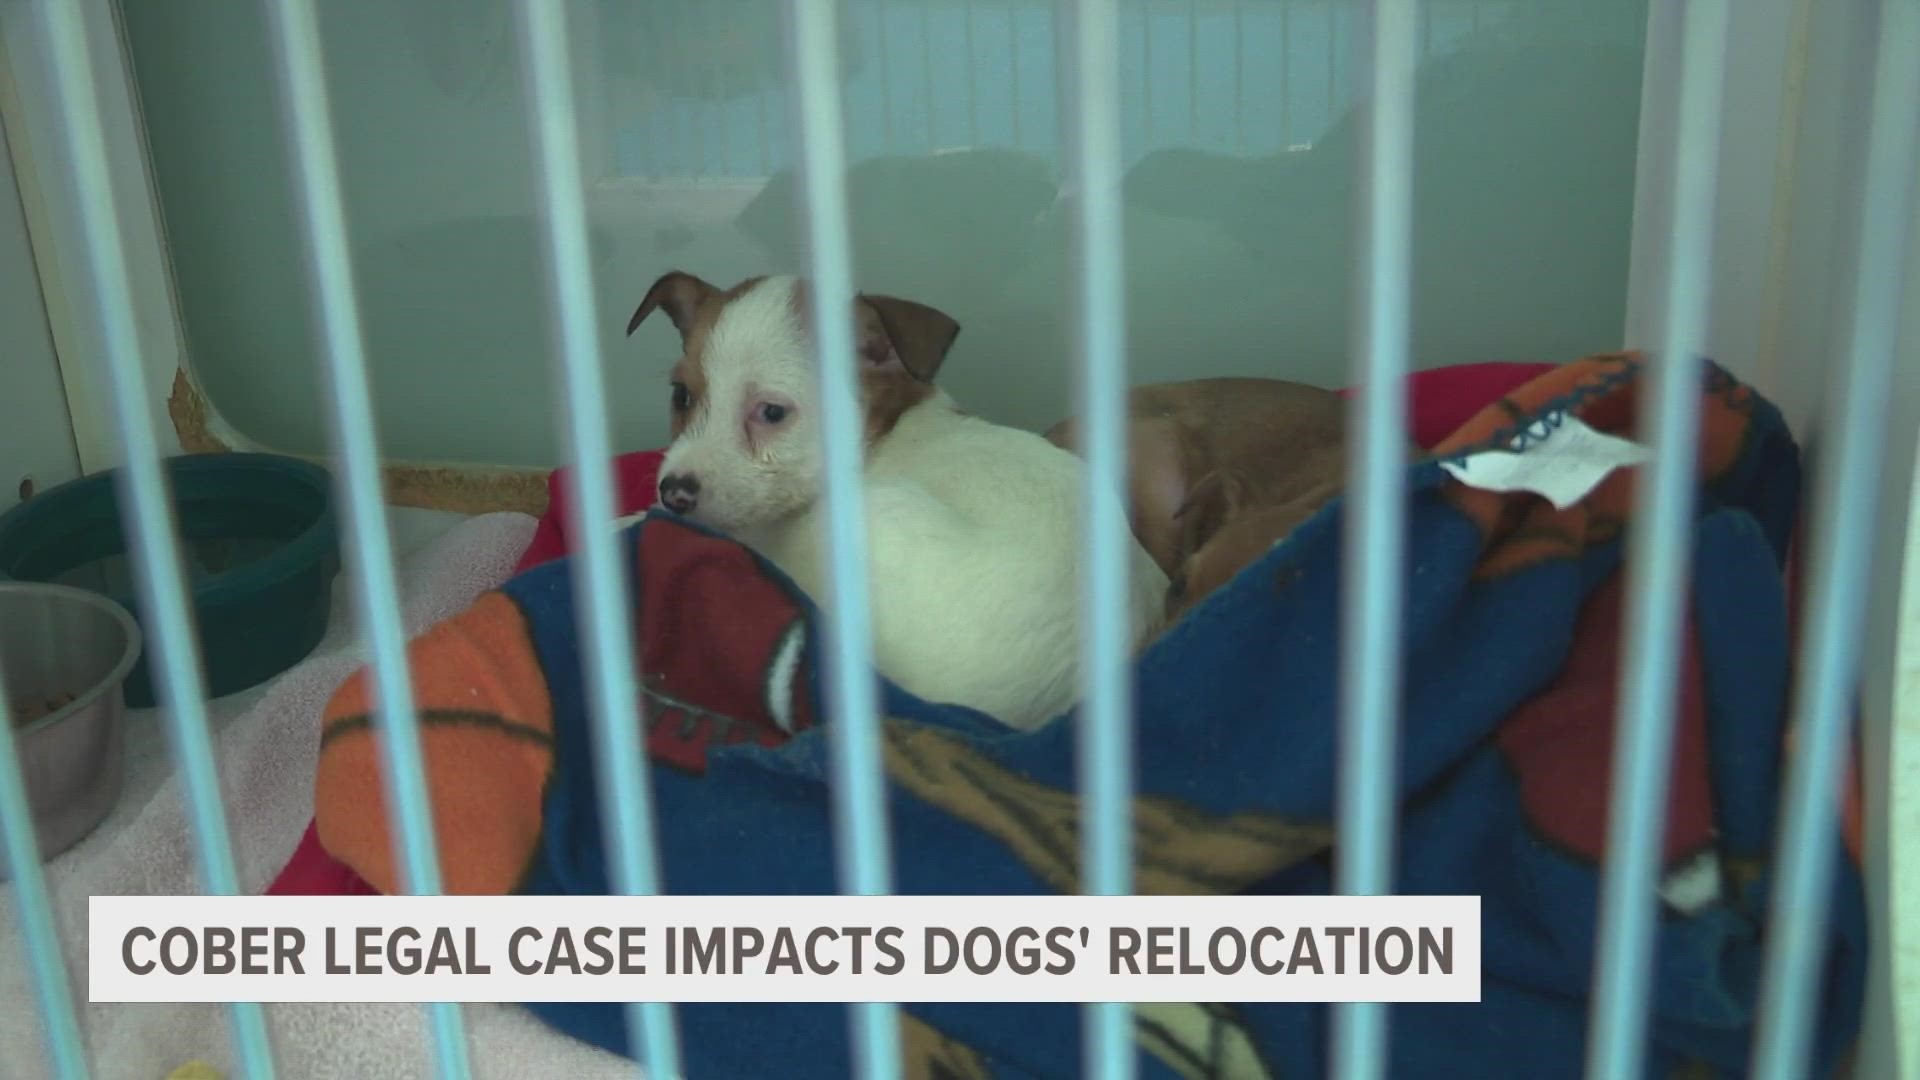 Court documents reveal that the home used for Cober's Canine Rescue was covered in feces and overcrowded with dogs.